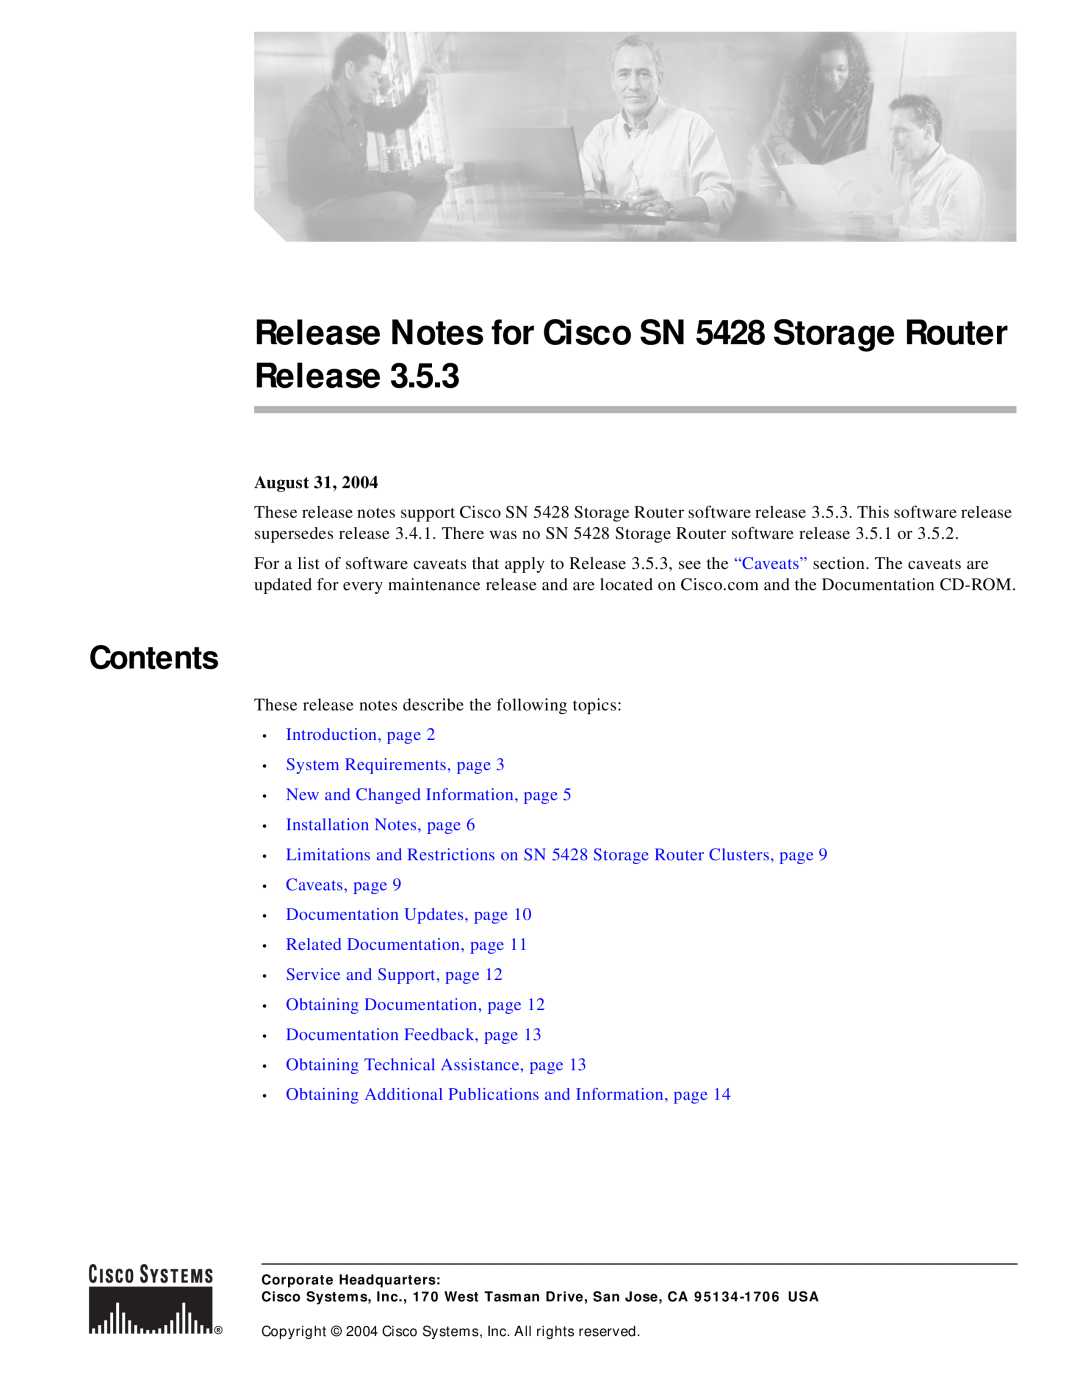 Cisco Systems SN 5428 manual Contents, August 31, Introduction, page System Requirements, page 